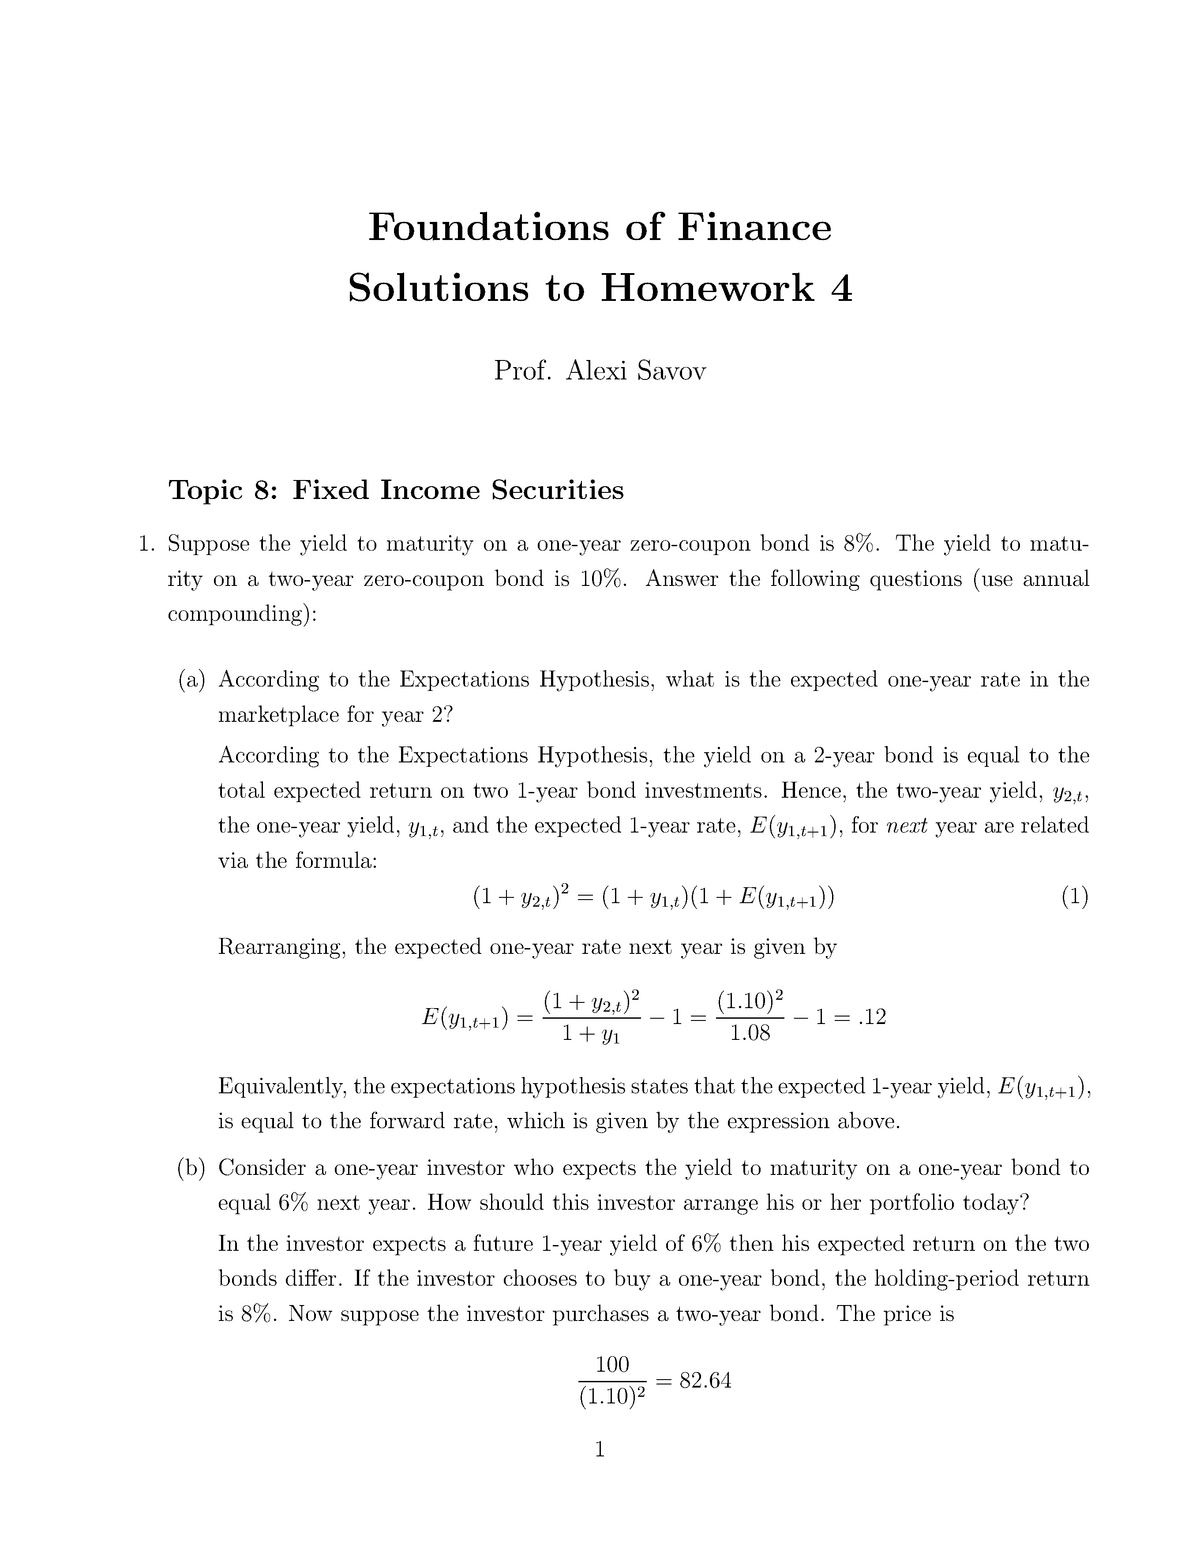 Solutions 4 Assignment 4 Solution Foundations Of Finance Solutions To Homework Prof Alexi Savov Topic Fixed Income Securities Suppose The Yield To Maturity Studocu